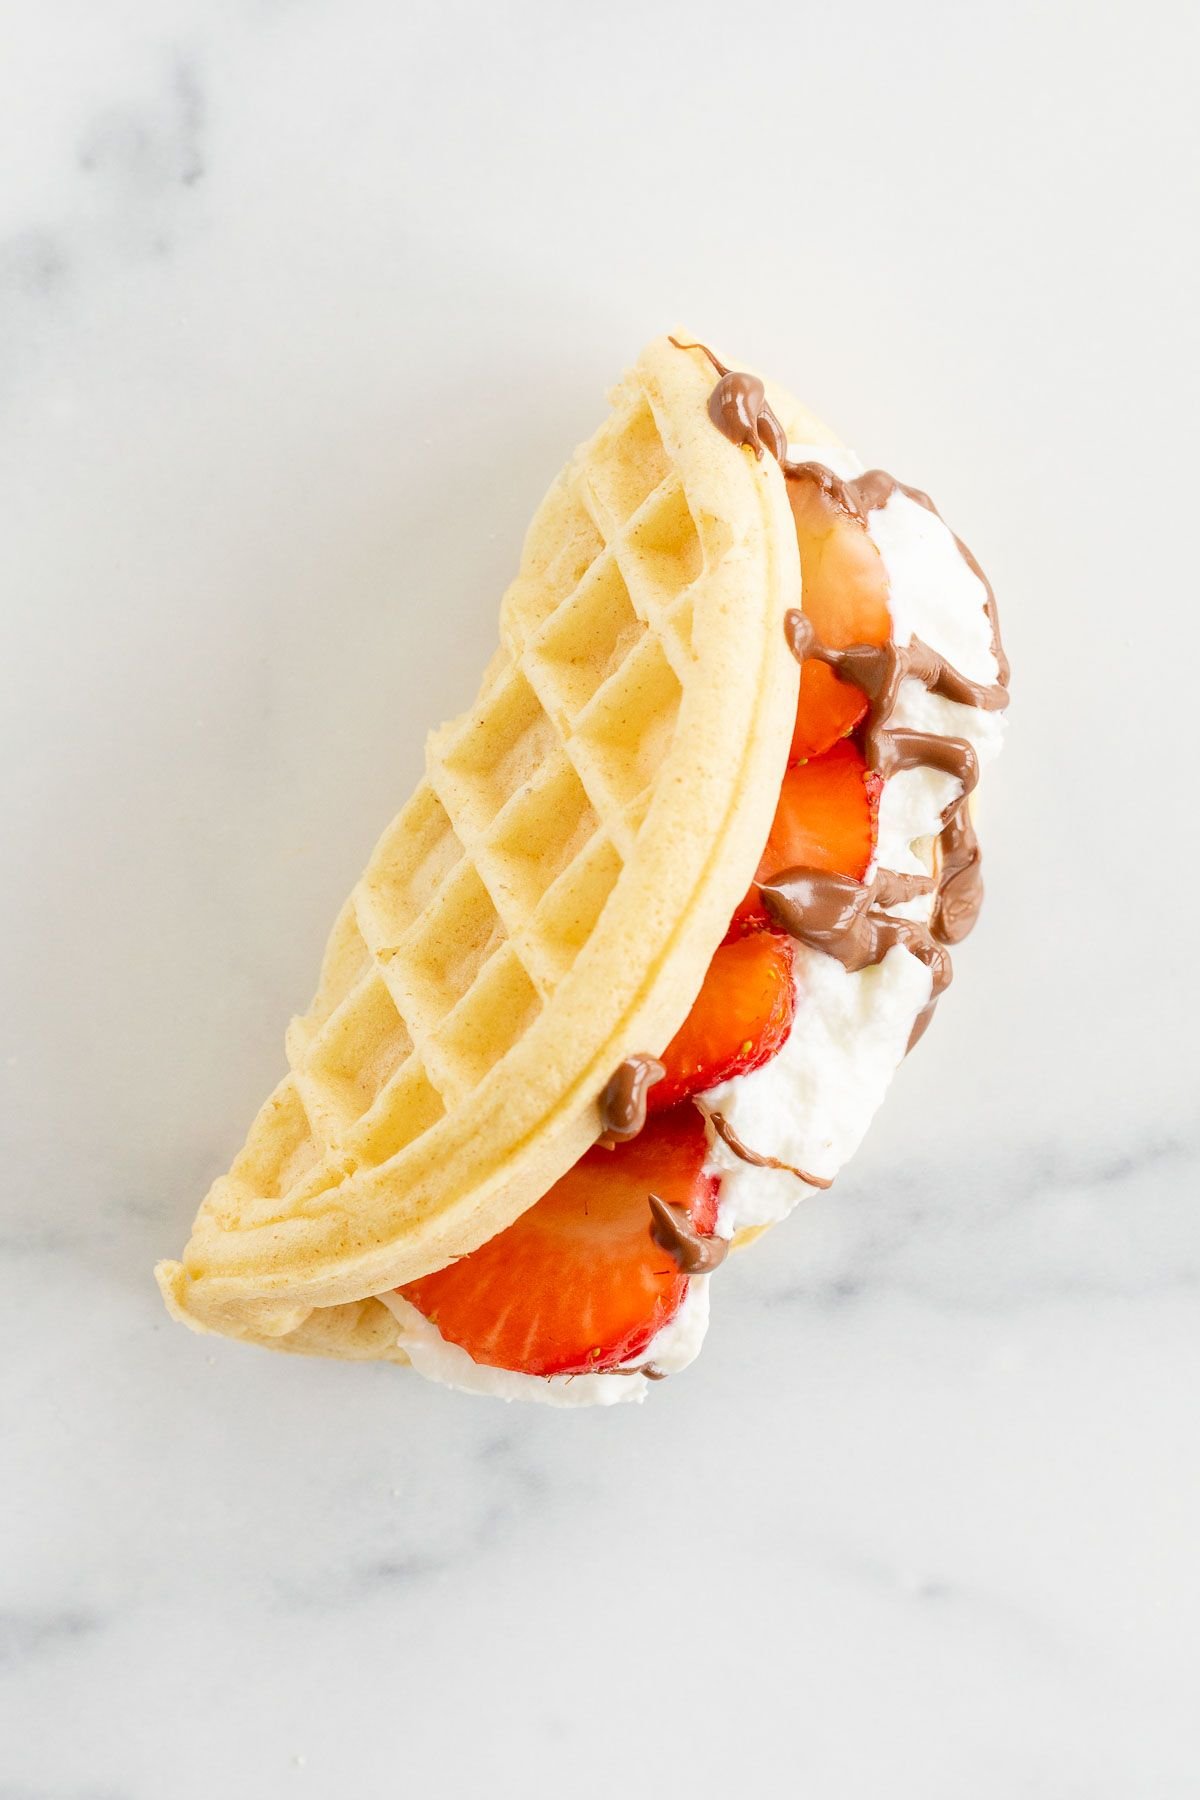 A waffle taco filled with strawberries, Nutella and whipped cream.